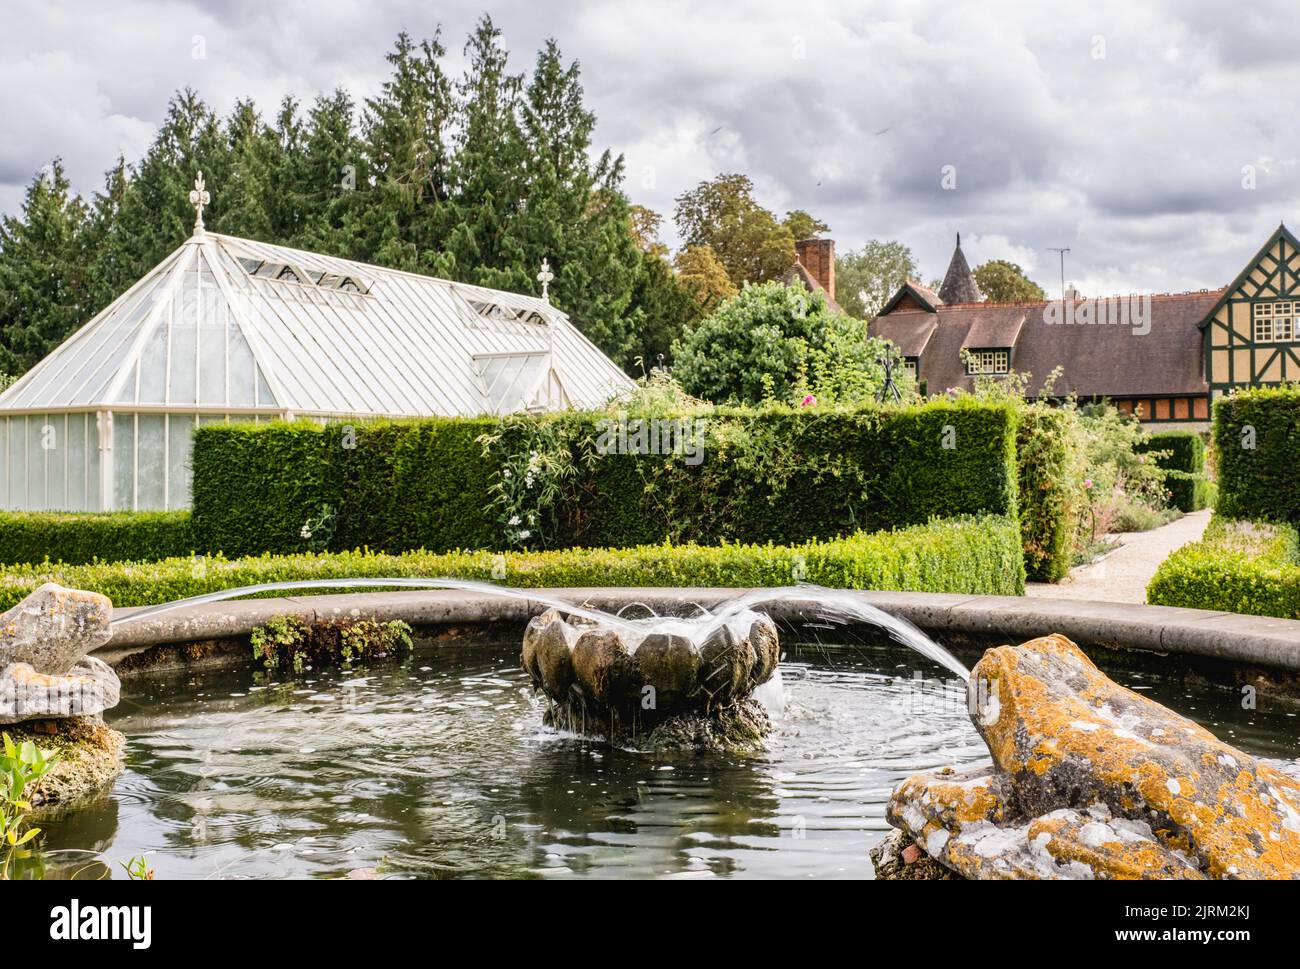 The ornamental fountain and green houses in the background at Eythrope Gardens on the Waddesdon Manor estate. Stock Photo